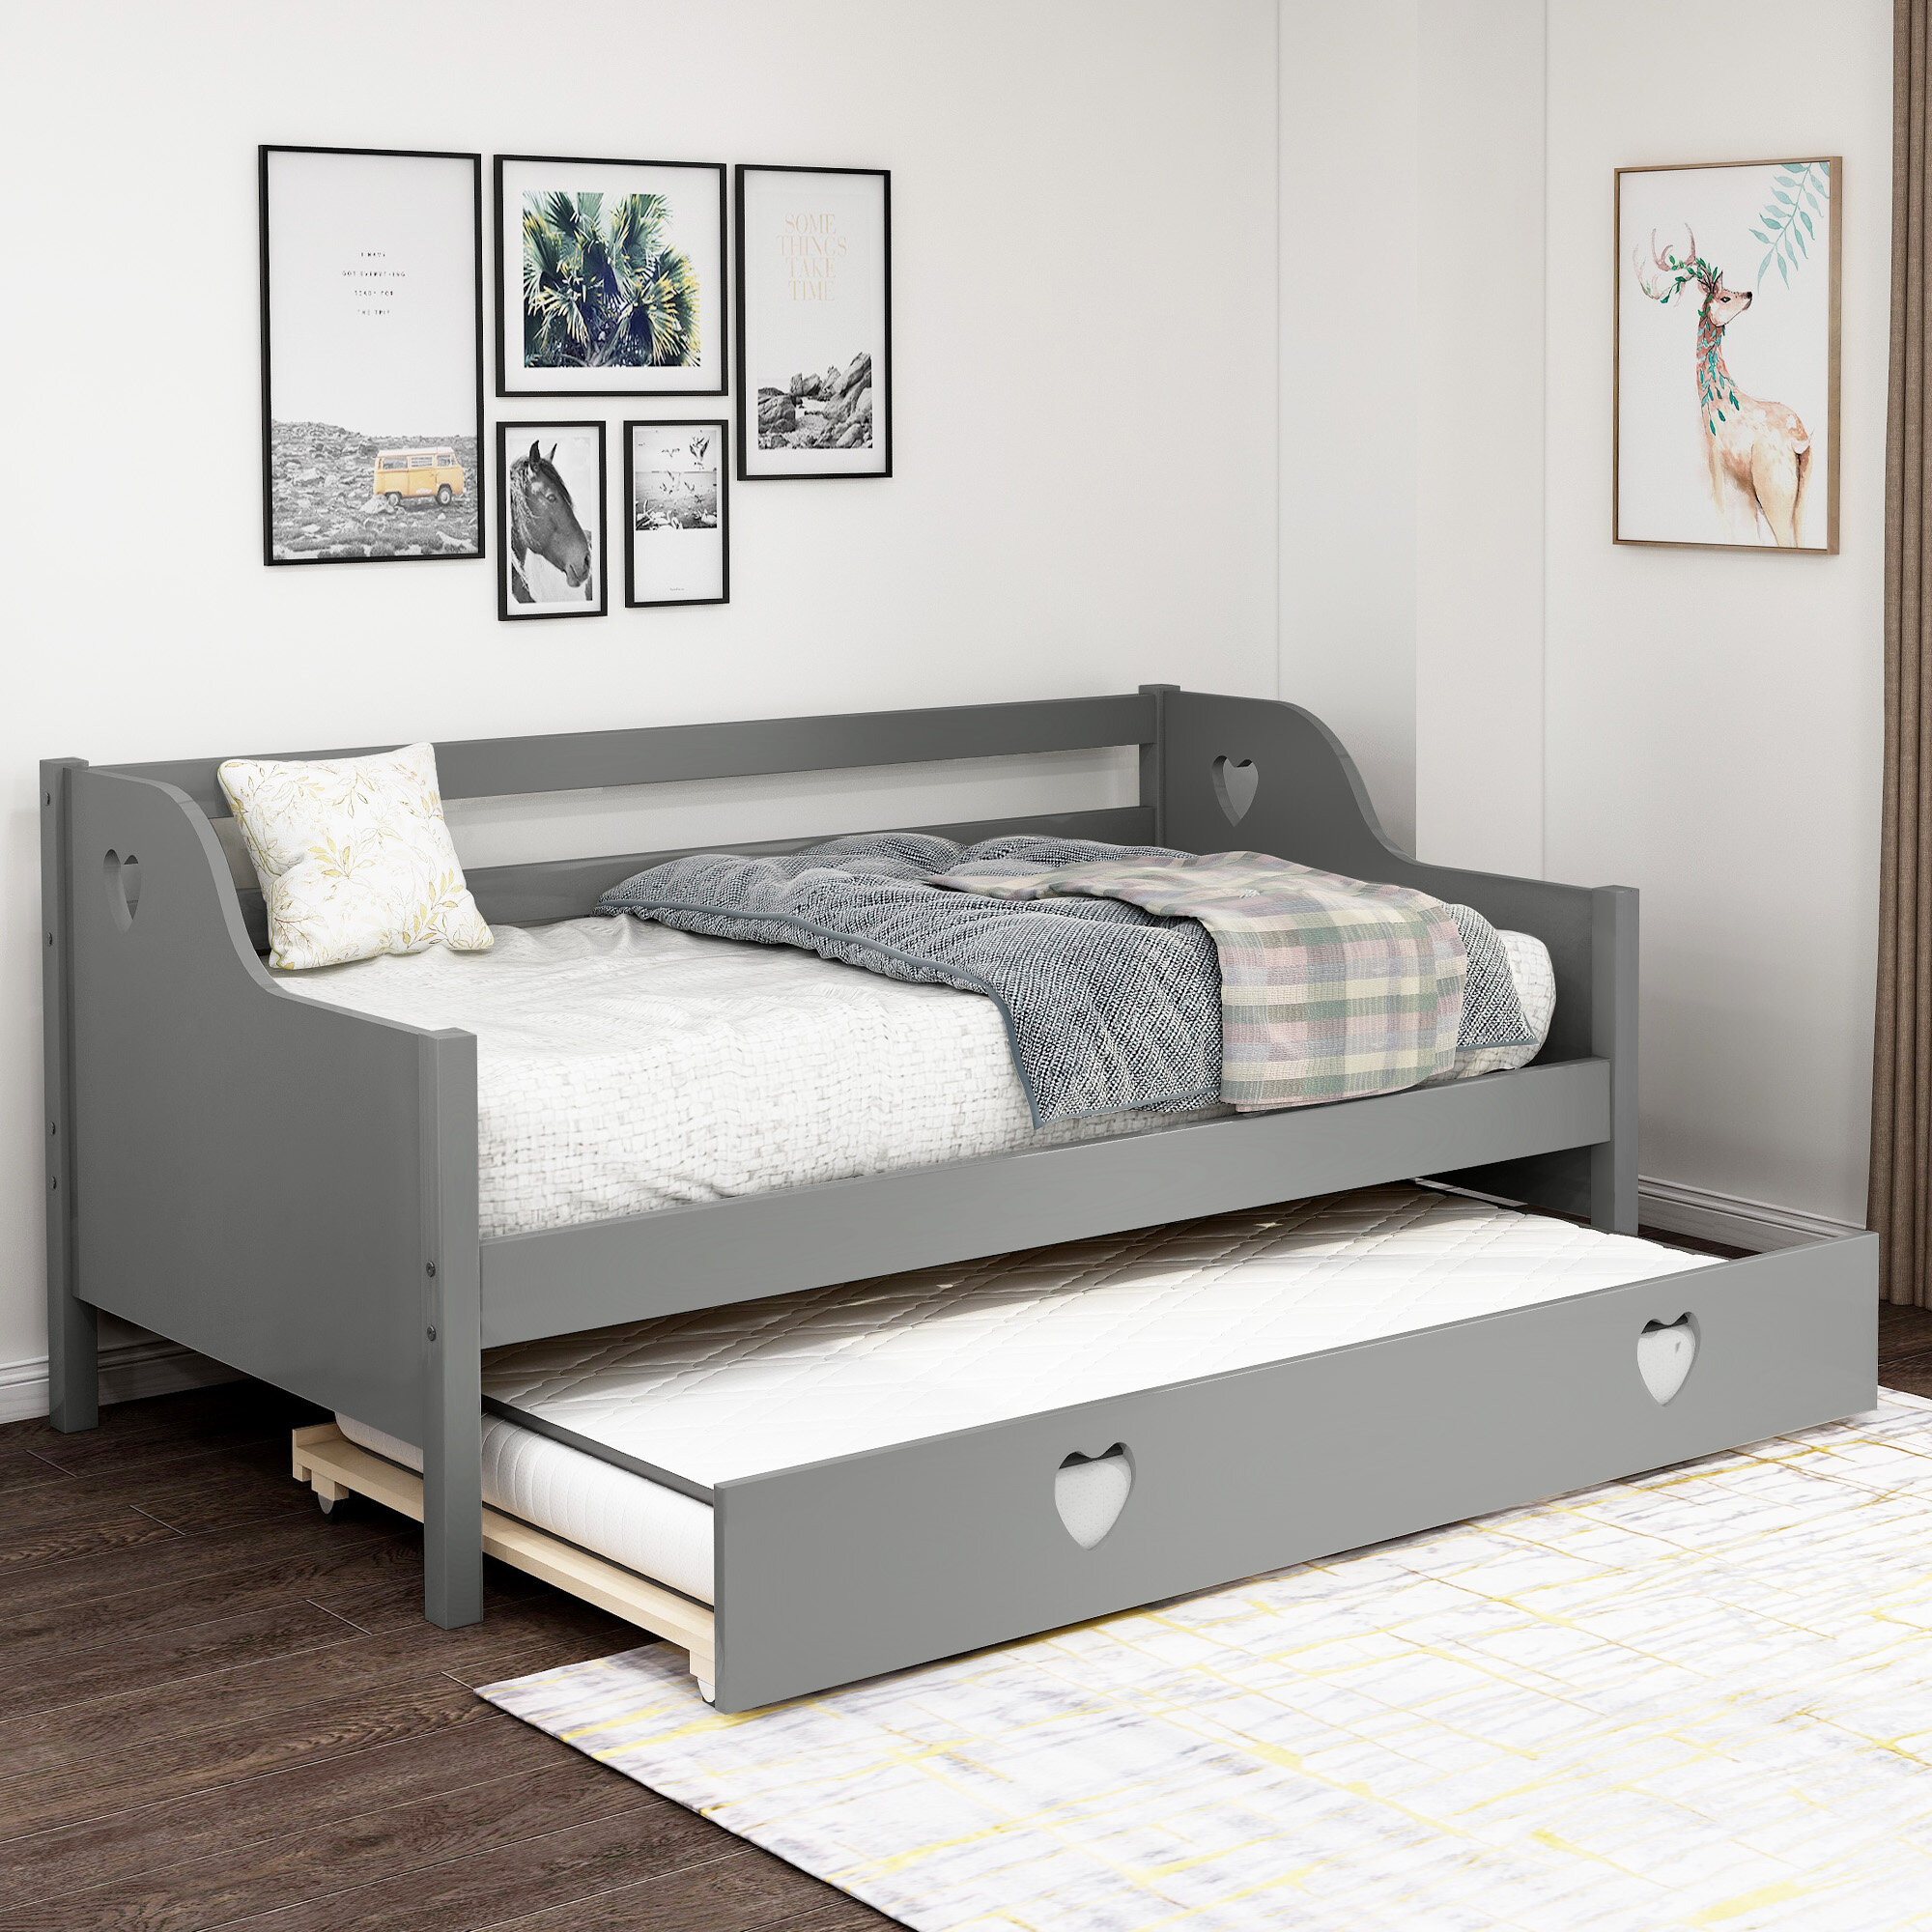 room place twin bed